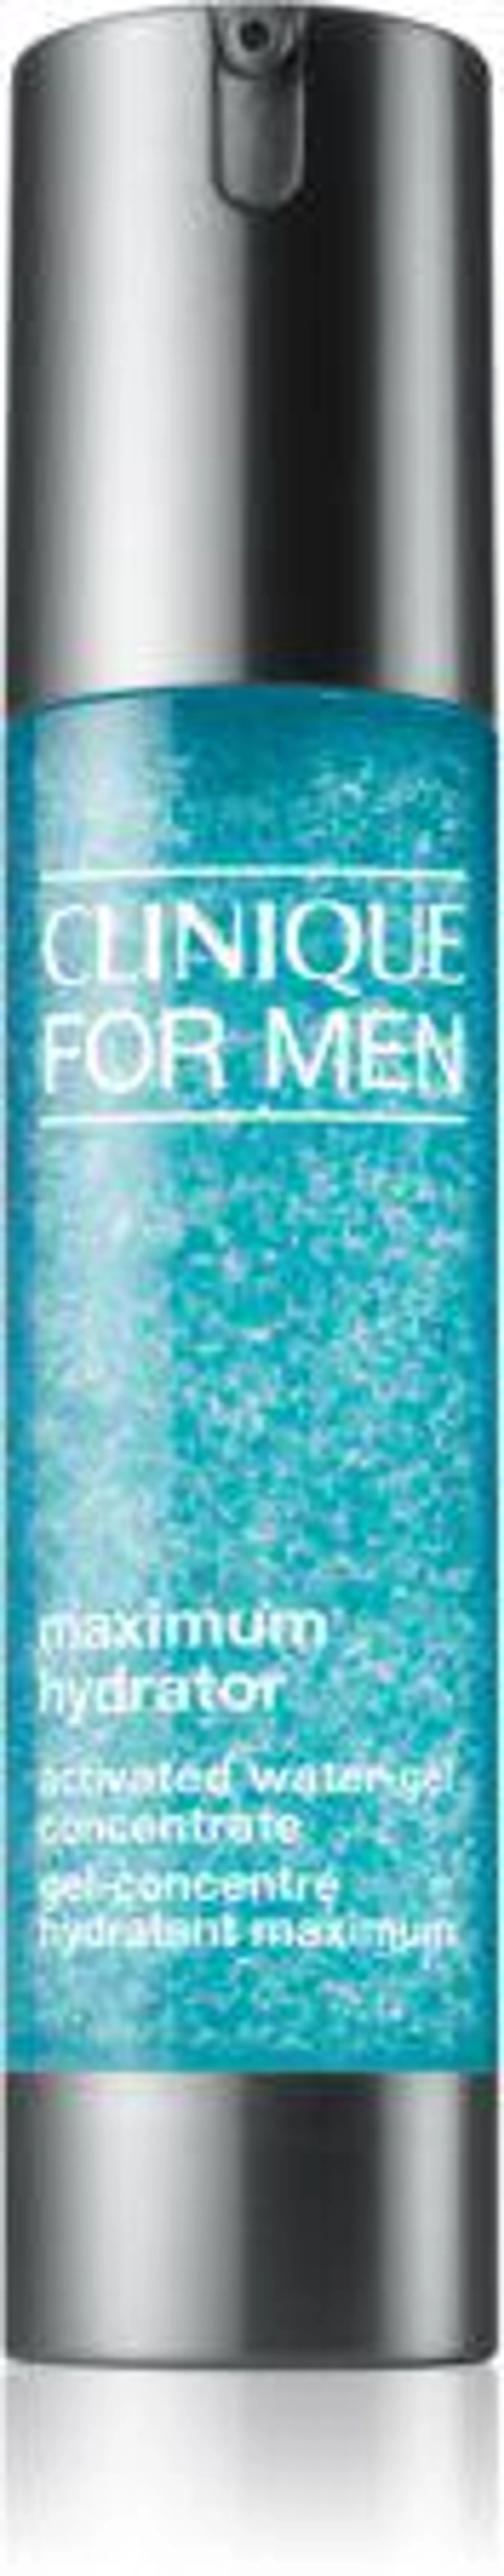 For Men™ Maximum Hydrator Activated Water-Gel Concentrate